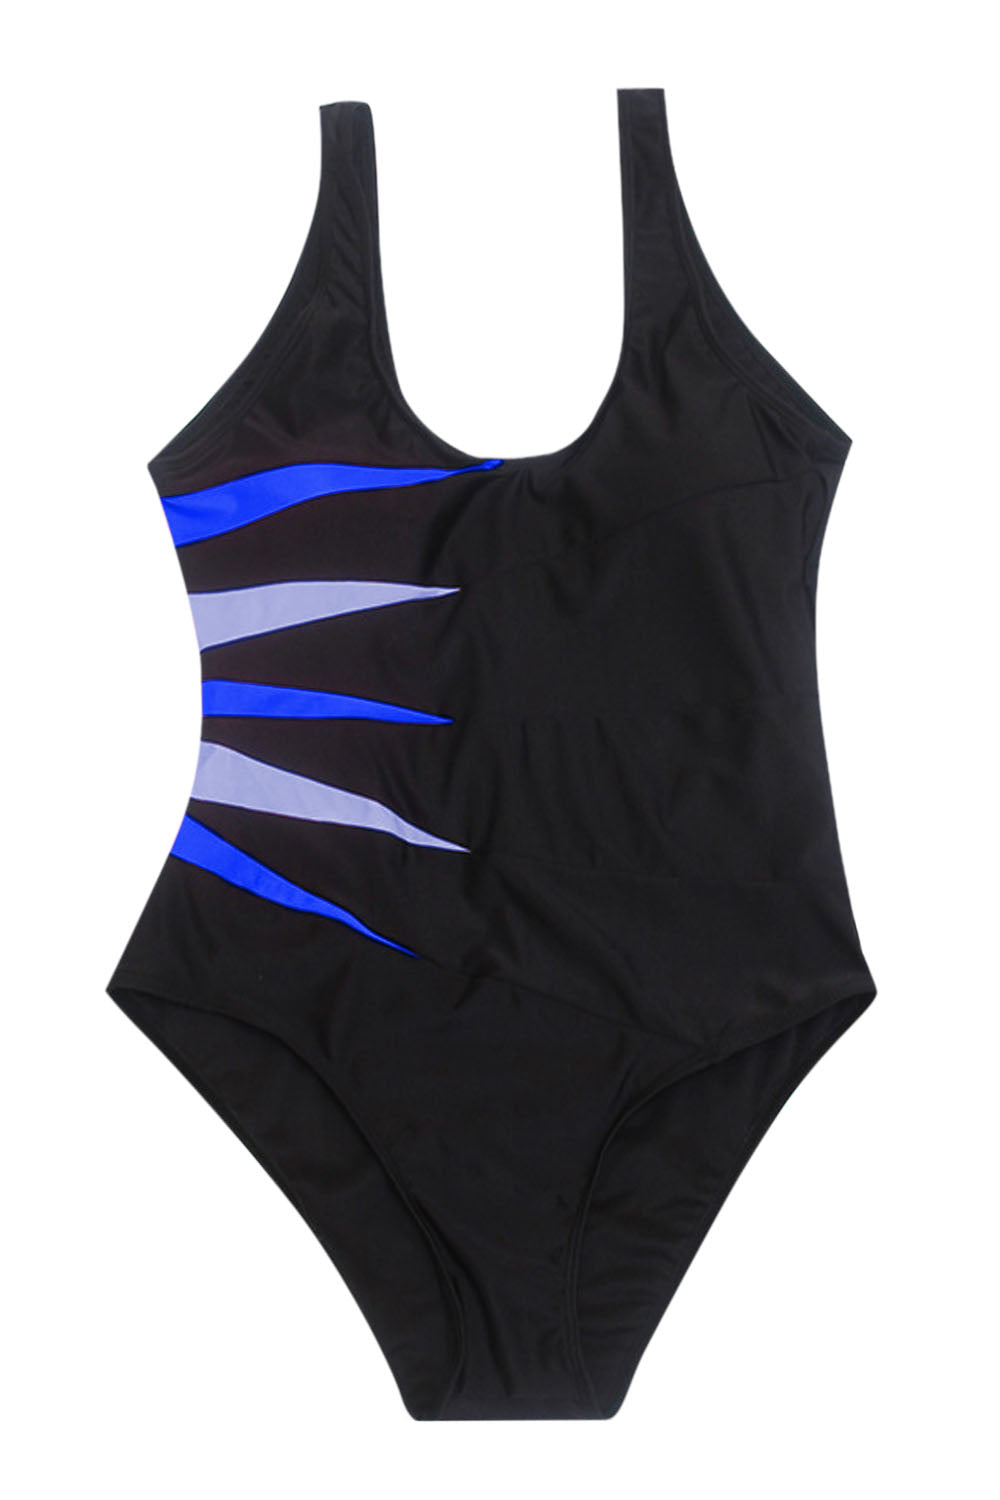 Iyasson Womens Unique Side Stripes Print One-piece Swimsuit